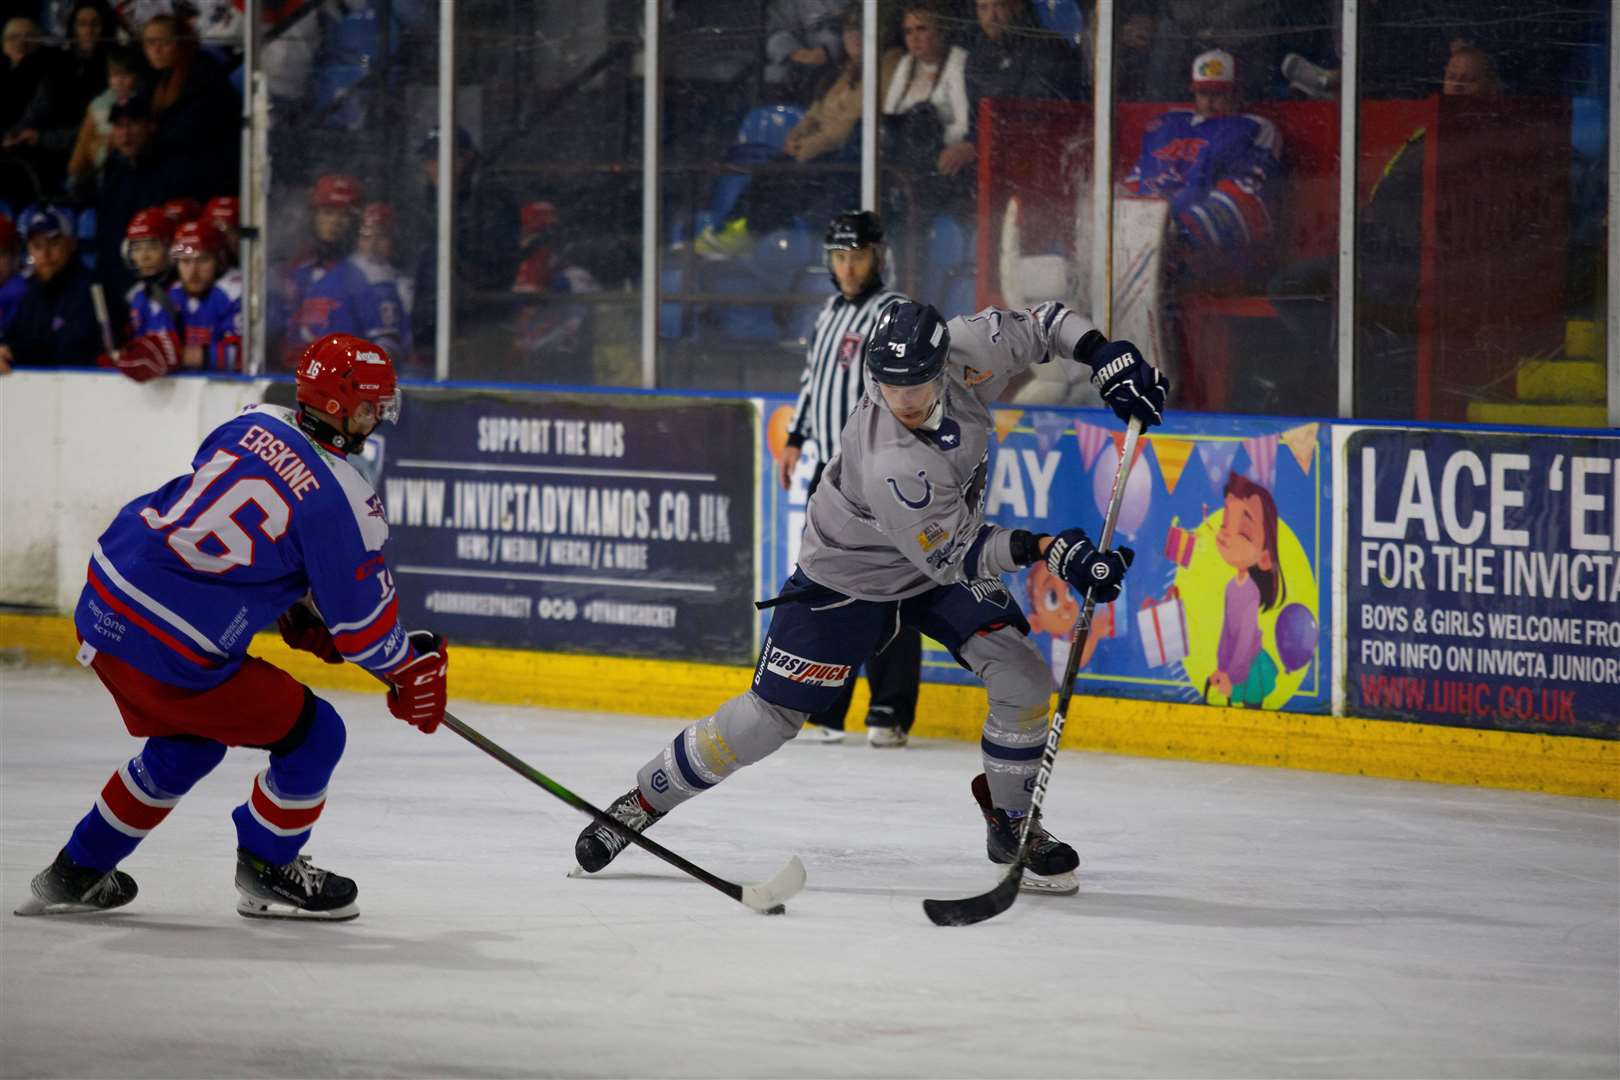 Tom Soar takes on Adam Erskine as Invicta Dynamos beat Slough Jets at Planet Ice Picture: David Trevallion